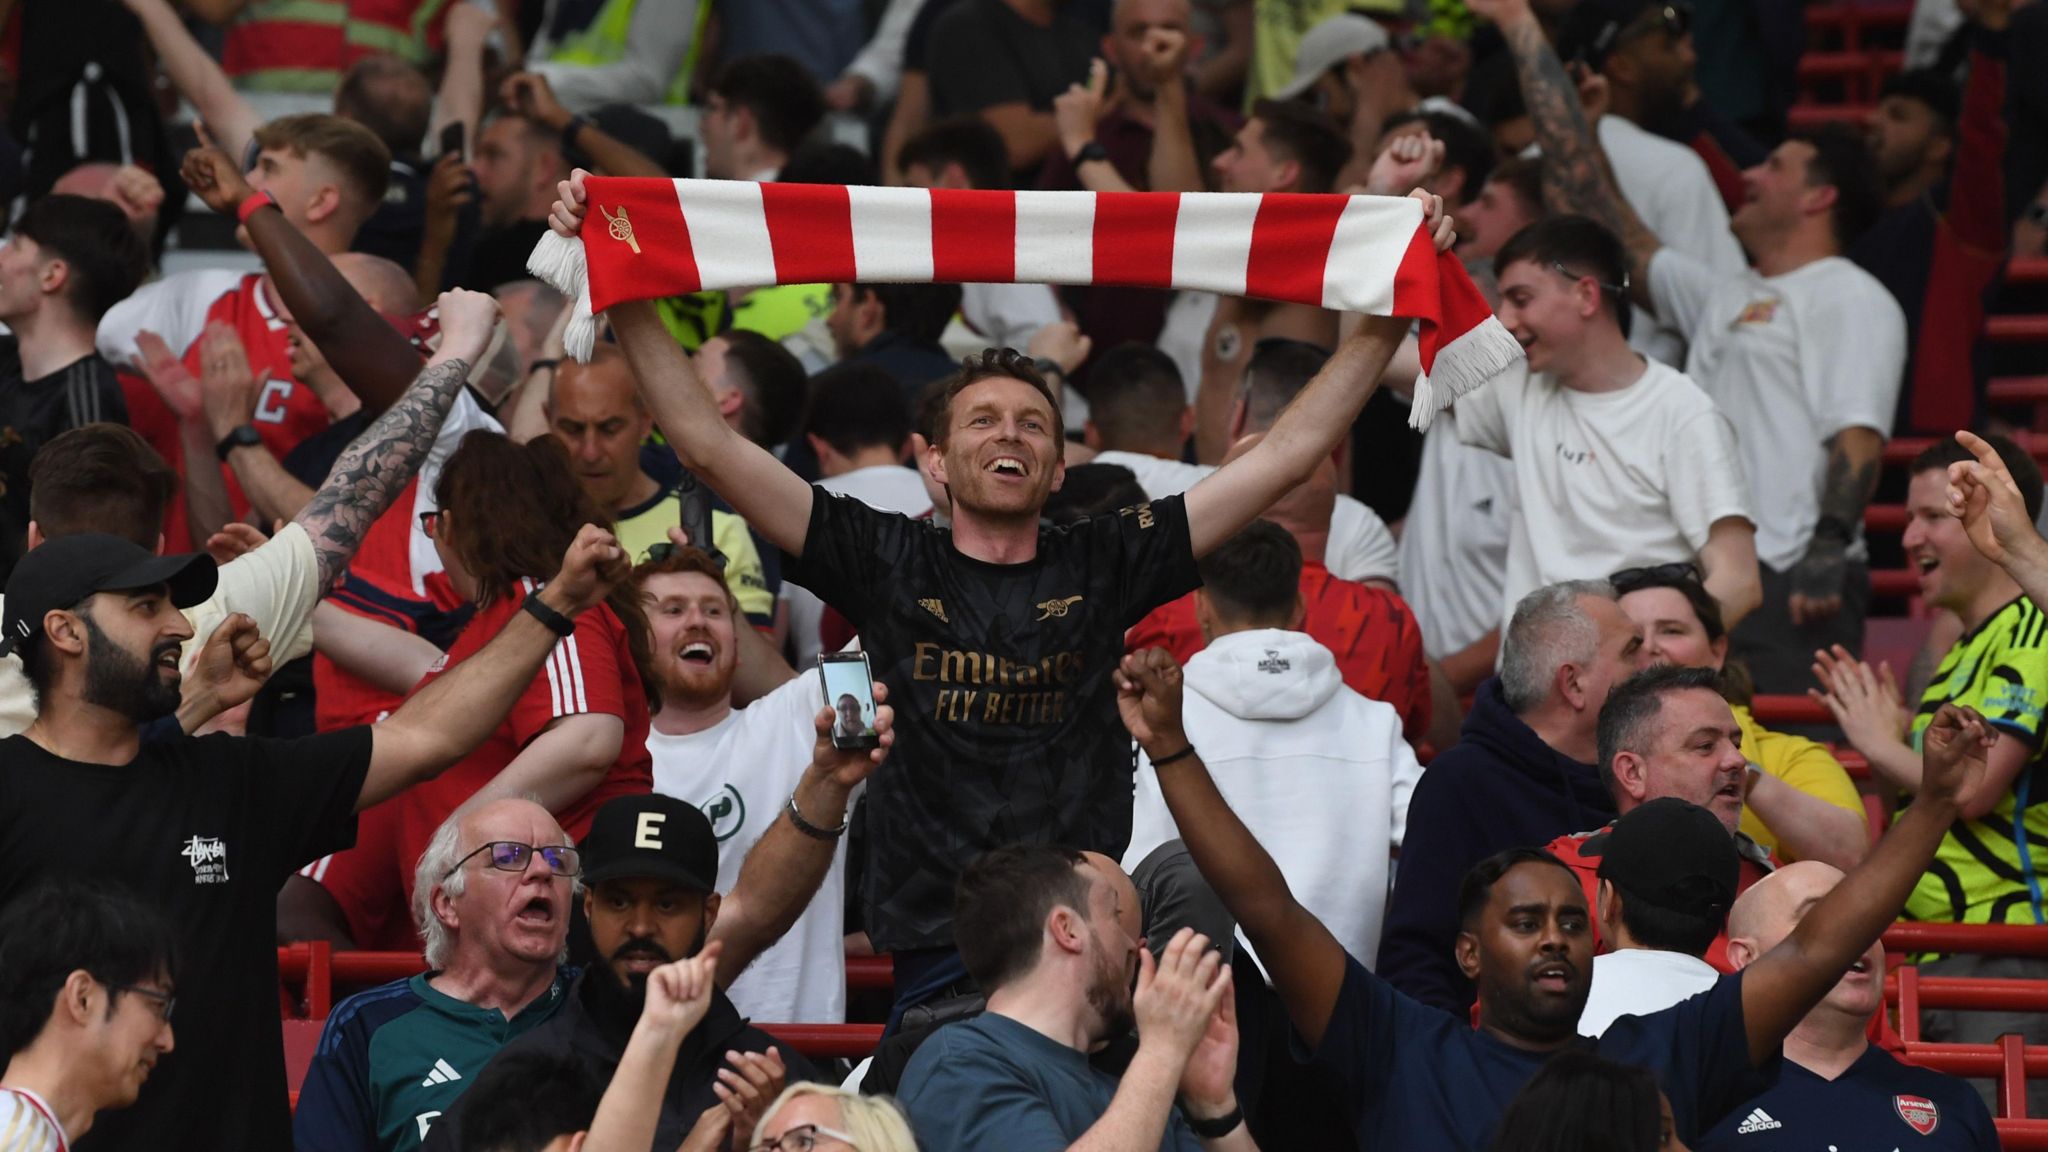 Arsenal fans celebrate their team's win at Manchester United